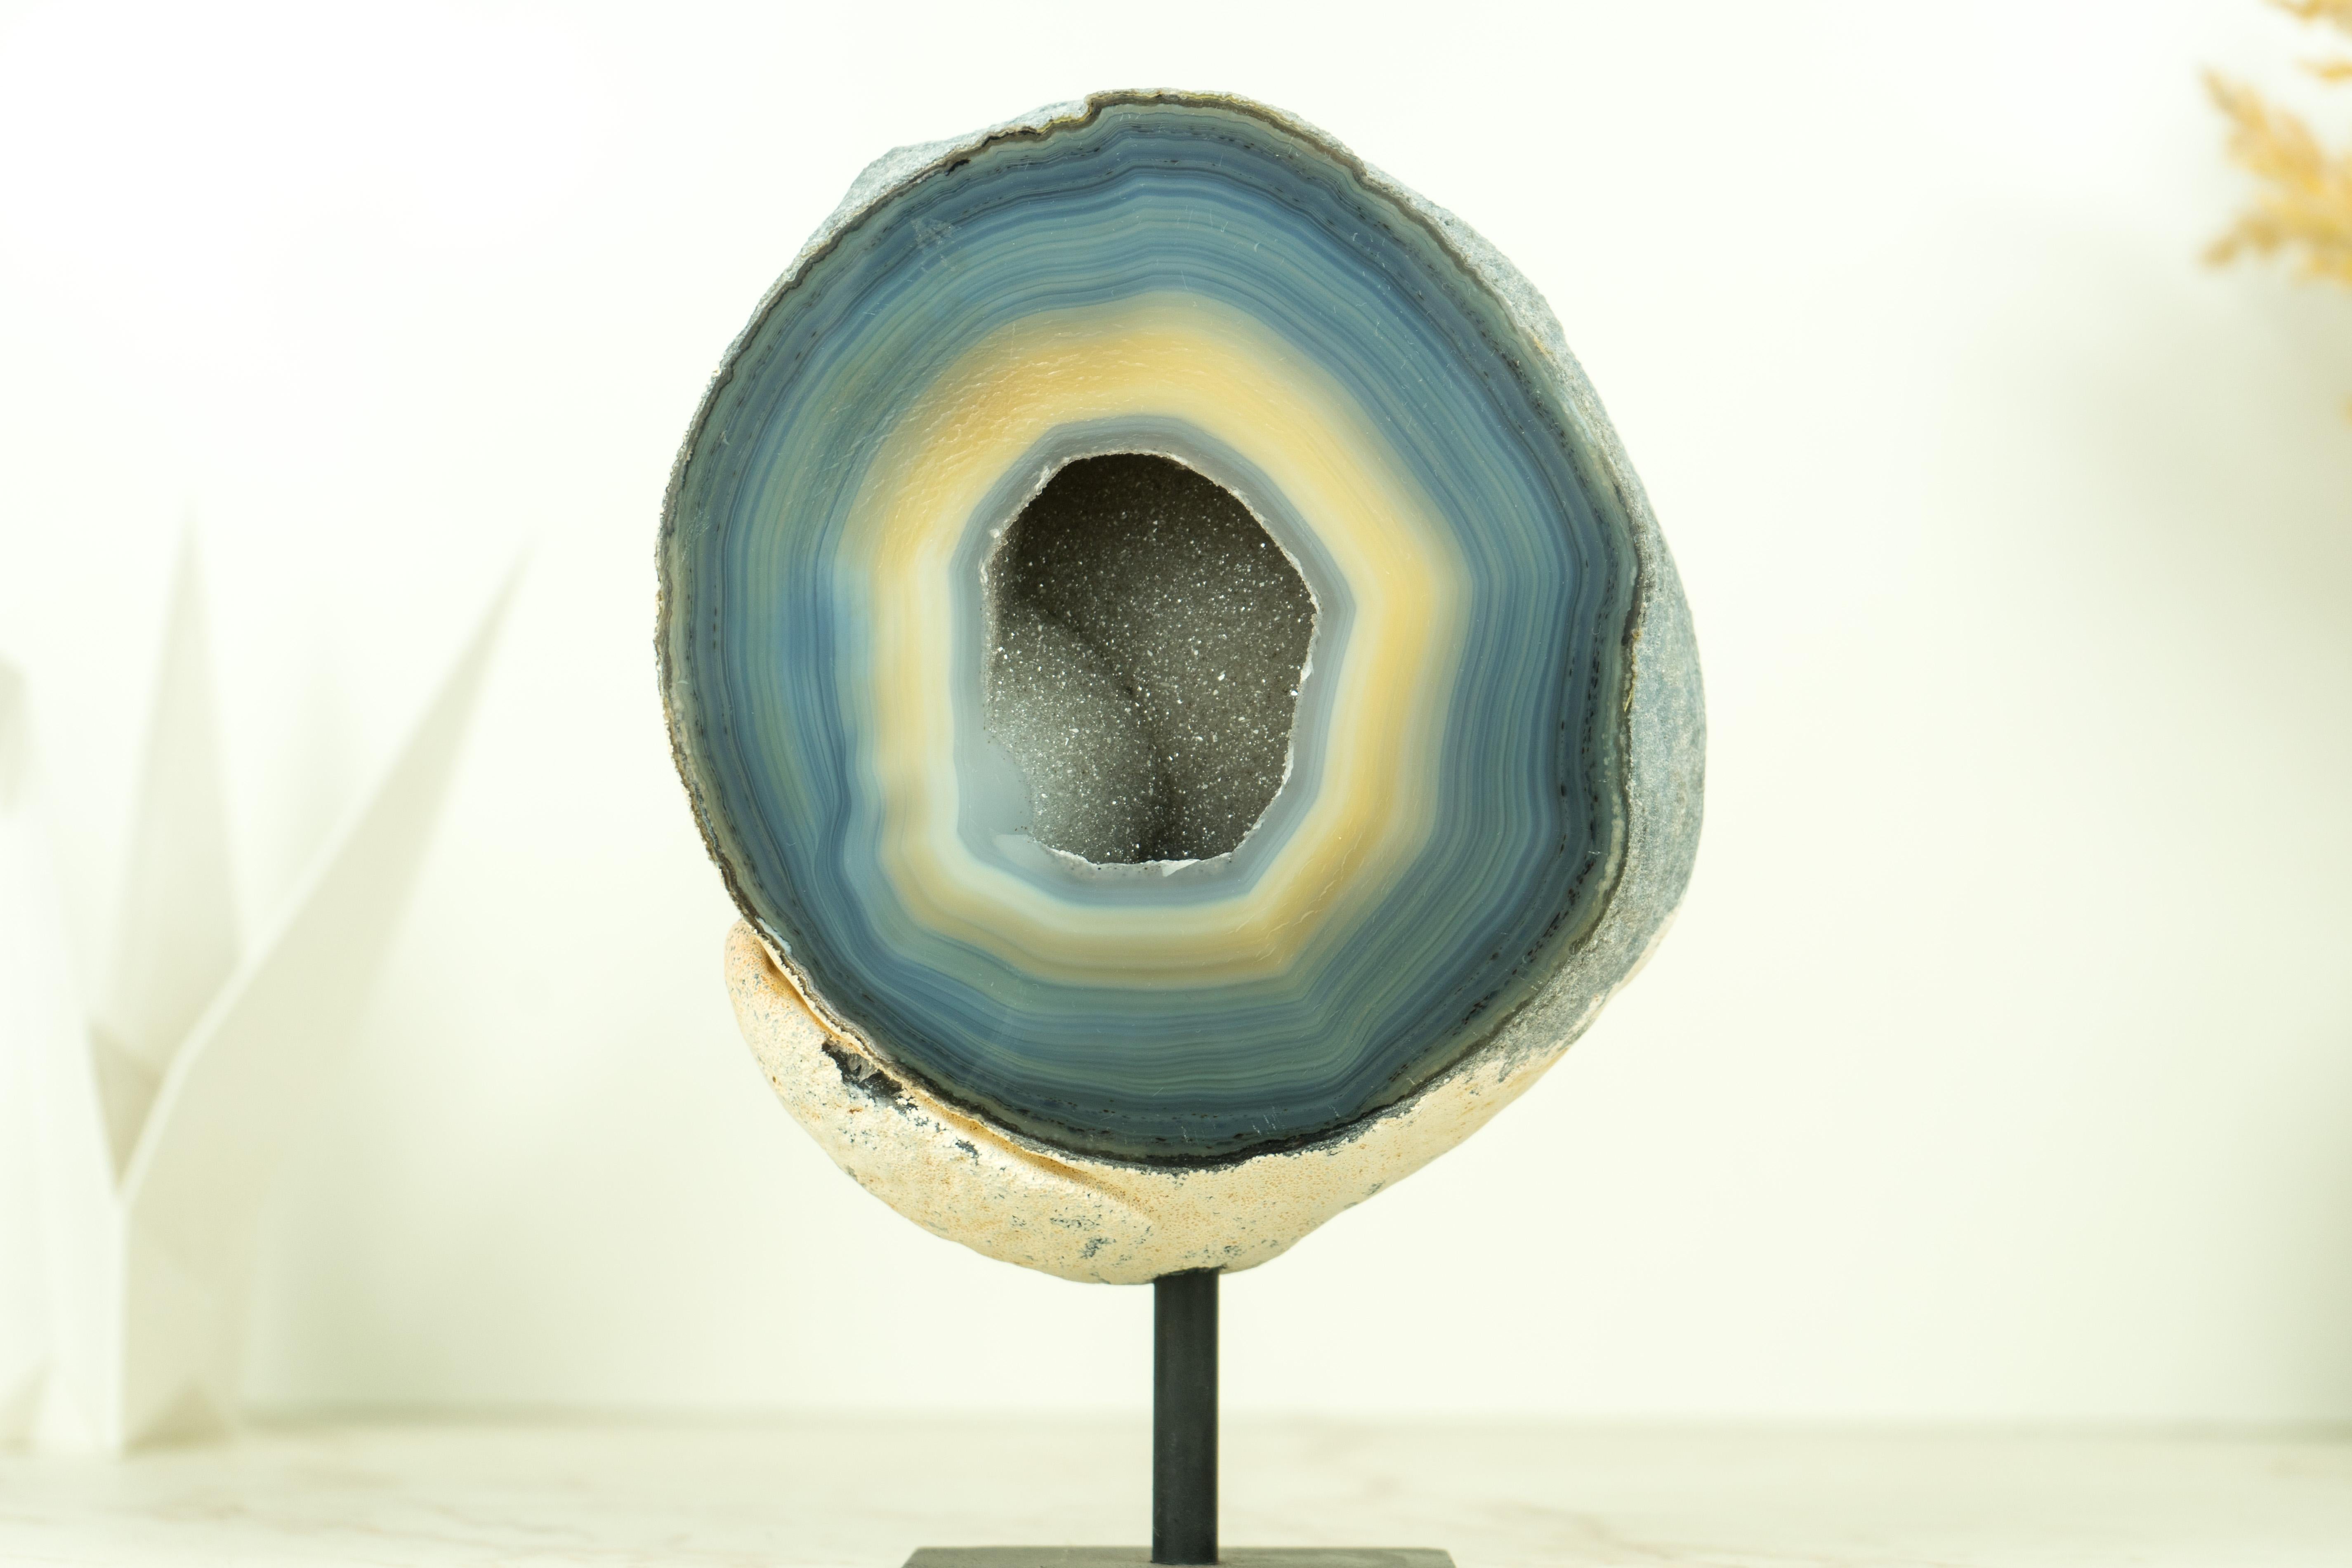 A beautiful small agate geode showcases natural blue agate laces (also known as Blue Lace Agate), rare cream-colored agate, and a gorgeous sugar druzy interior. This geode is considered exceptionally unique and superior due to the quality of the